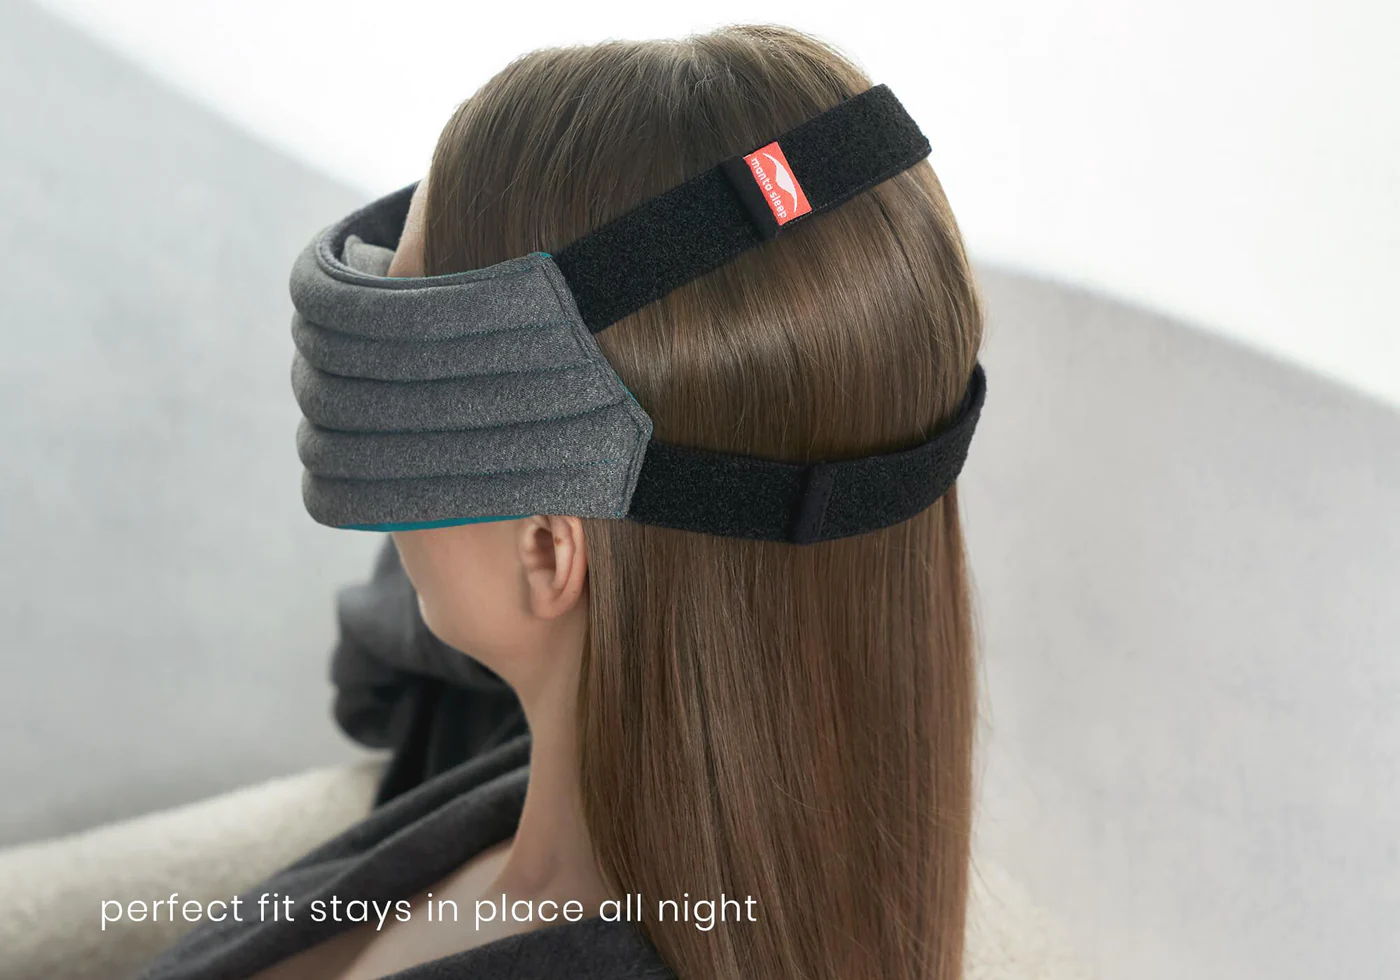 The back view of a girl’s head wearing the best weighted sleep mask for side sleepers. The mask is secured to her head with 2 black bands.